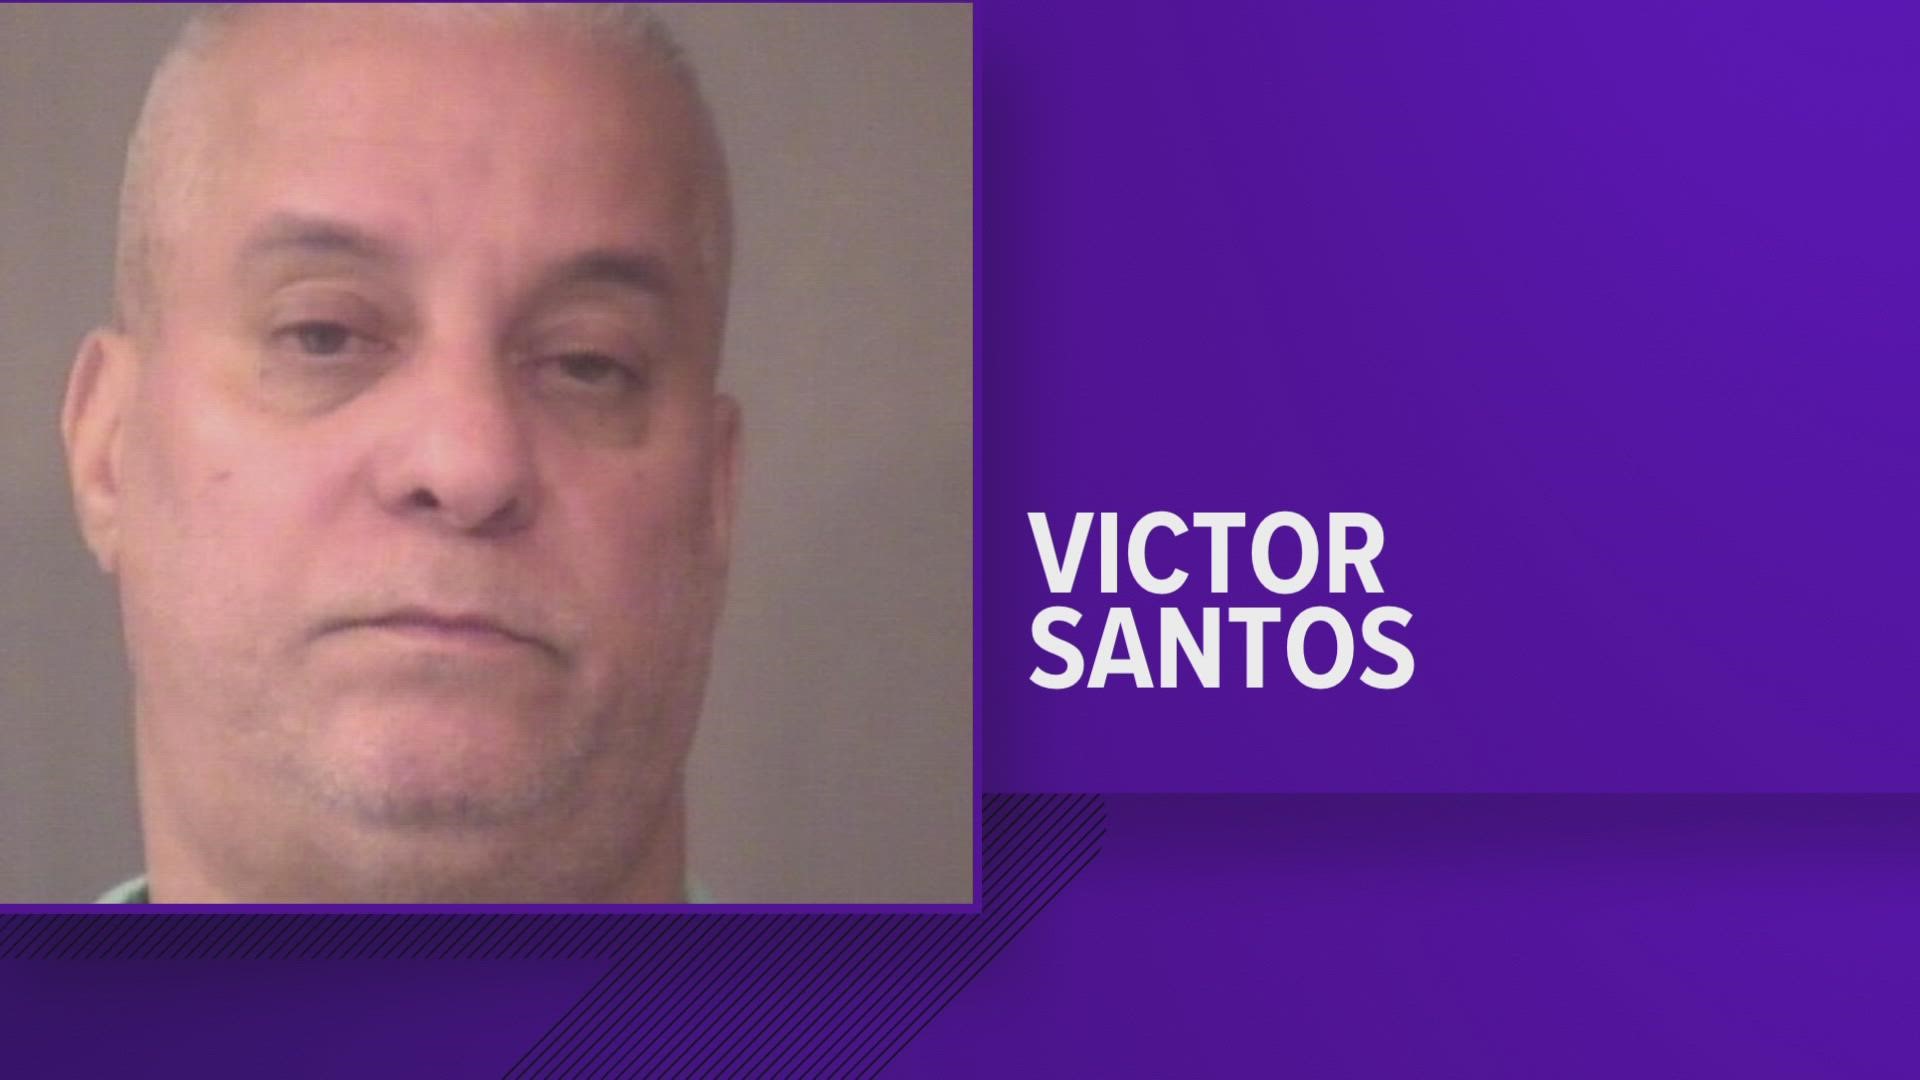 23 players from a Chicago hockey team were on the bar at the time. Victor Santos faces 26 charges.